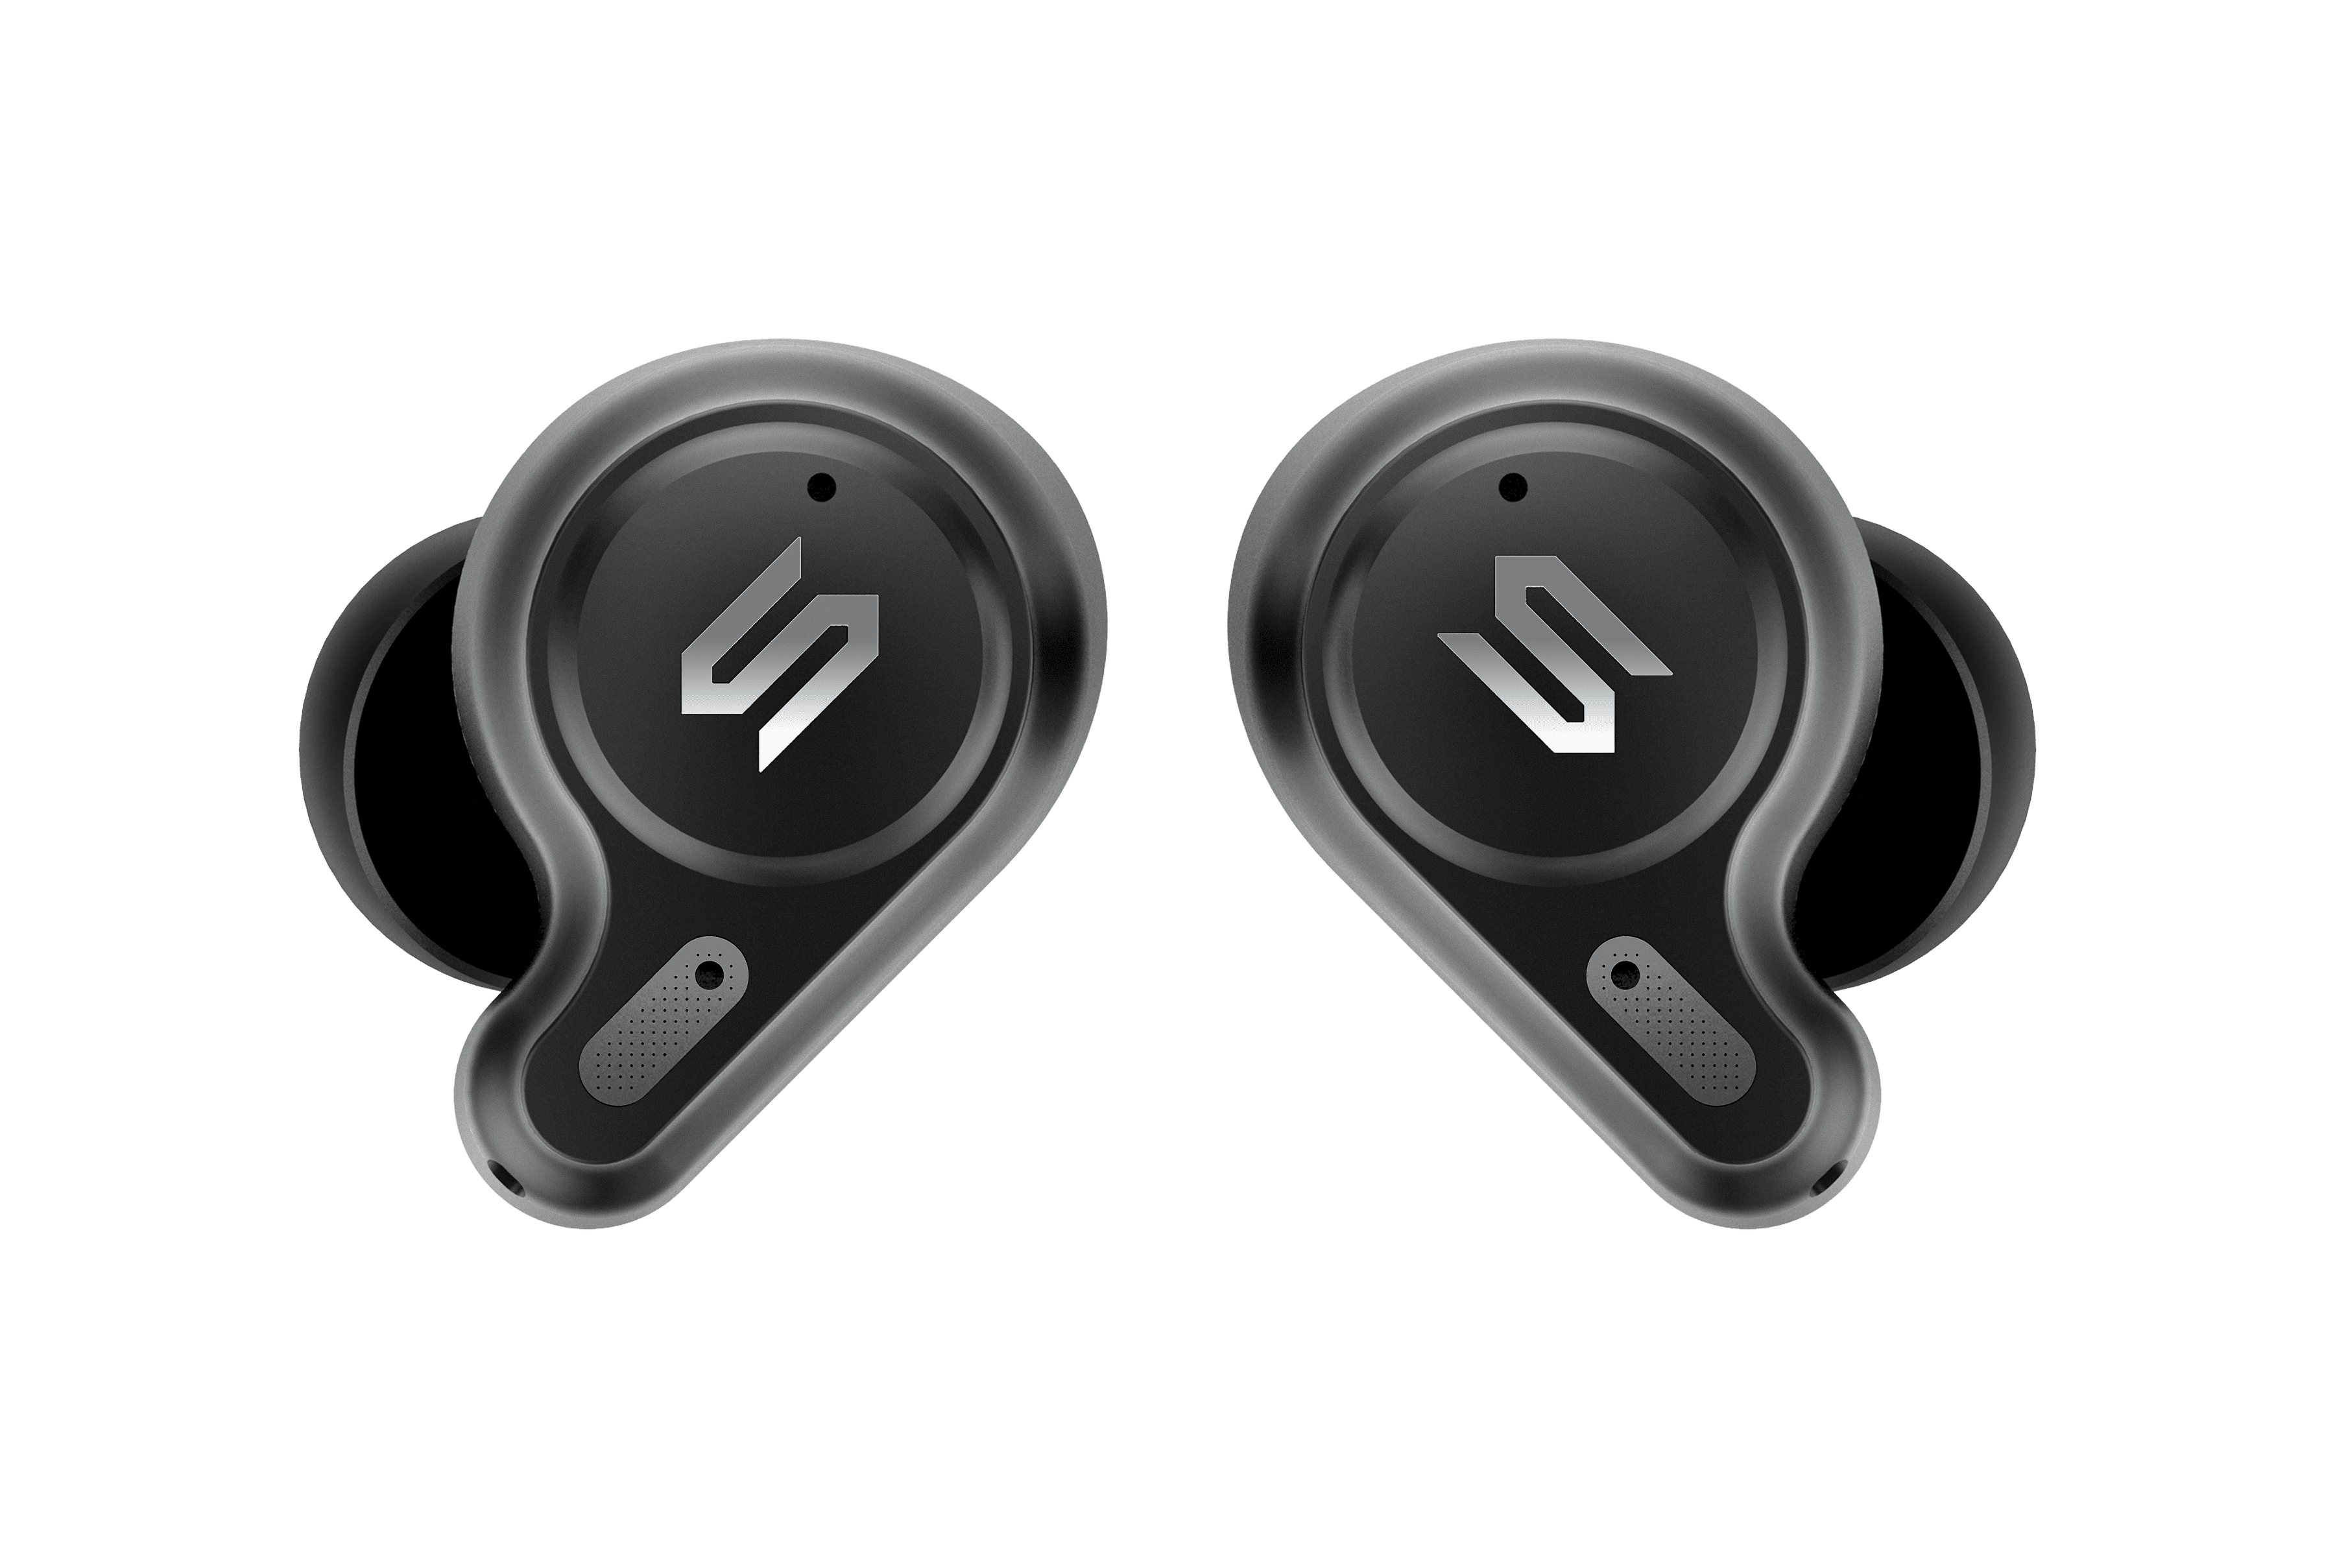 SOUL S-Tron True Wireless Earbuds with LED Light Ring (BLACK), , large image number 2